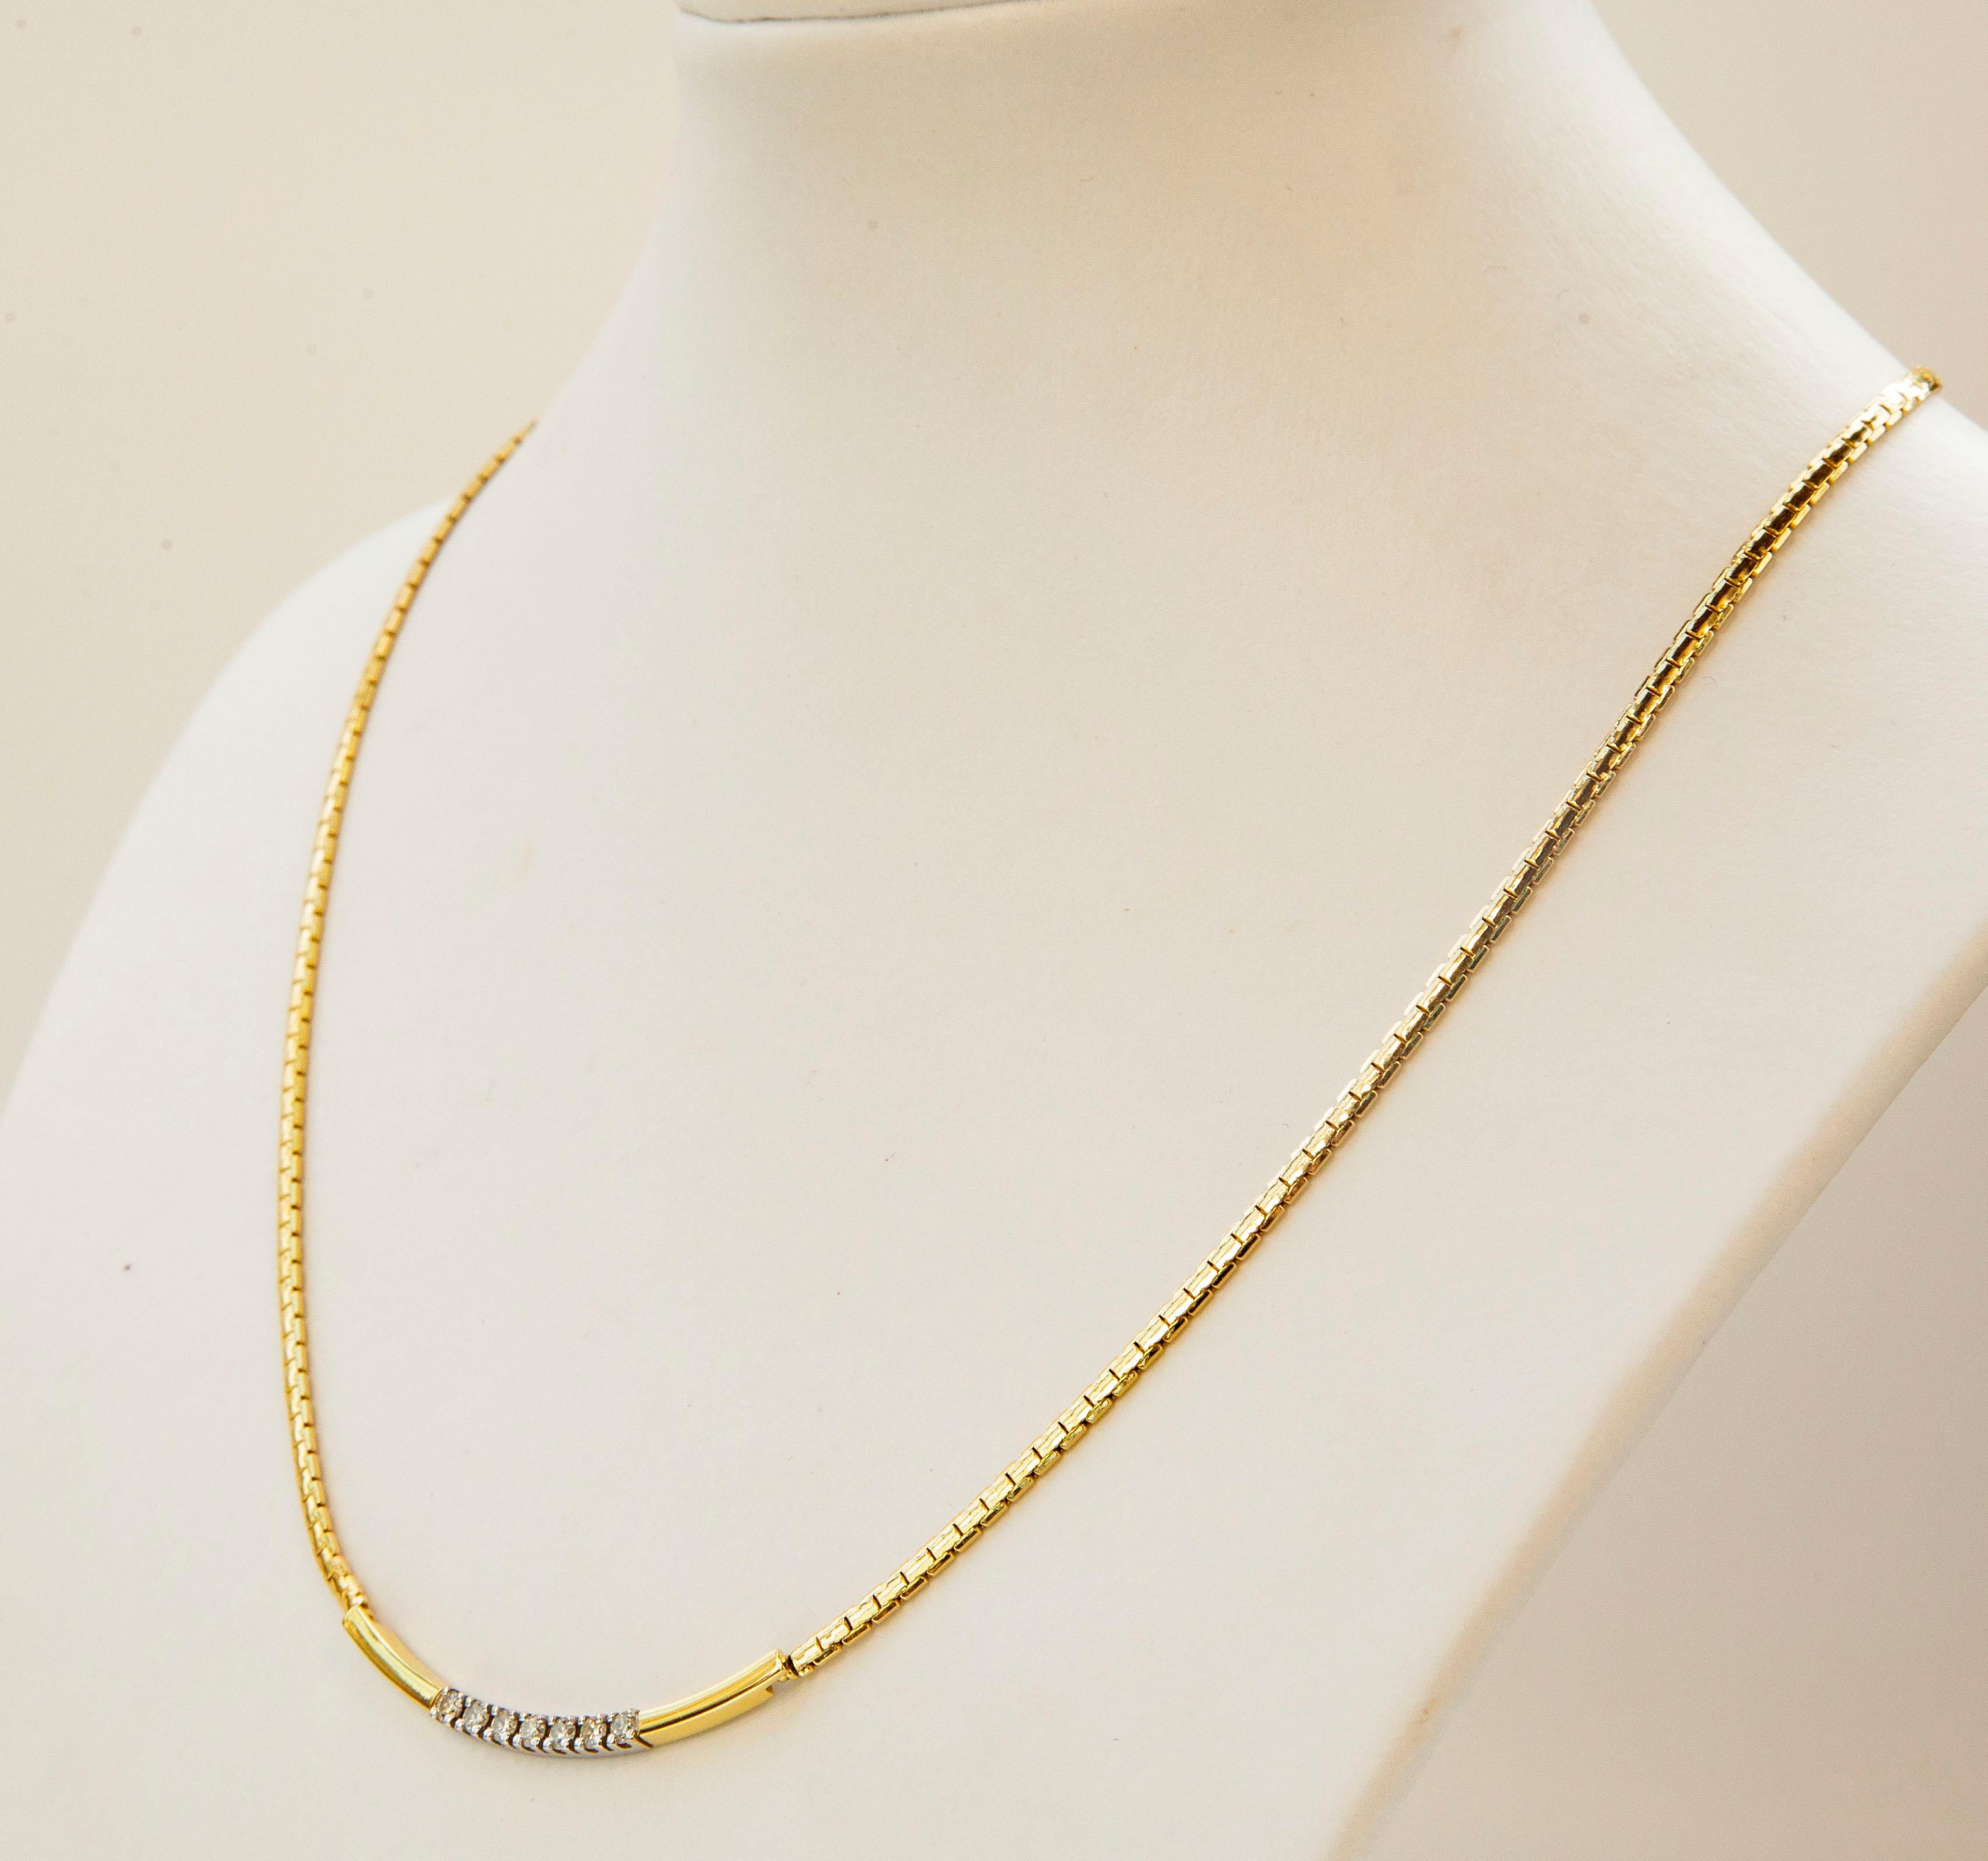 A vintage flat snake necklace made of 14 karat yellow solid gold. The necklace features a central bicolor (white and yellow gold) curved insert set with seven brilliant cut diamonds.  The necklace closes with a spring ring clasp.

It would be a